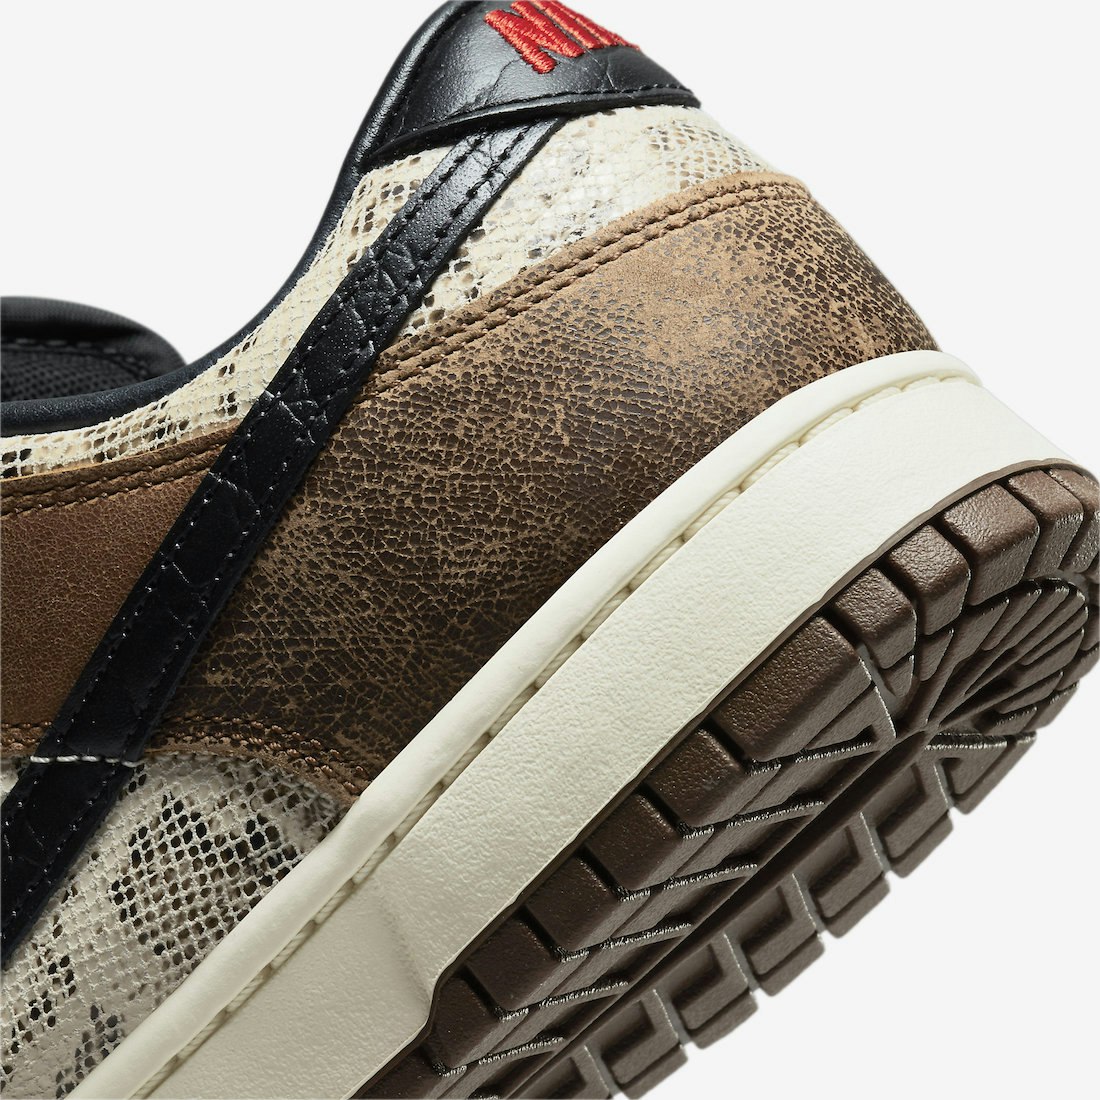 Nike Dunk Low CO.JP "Natural"